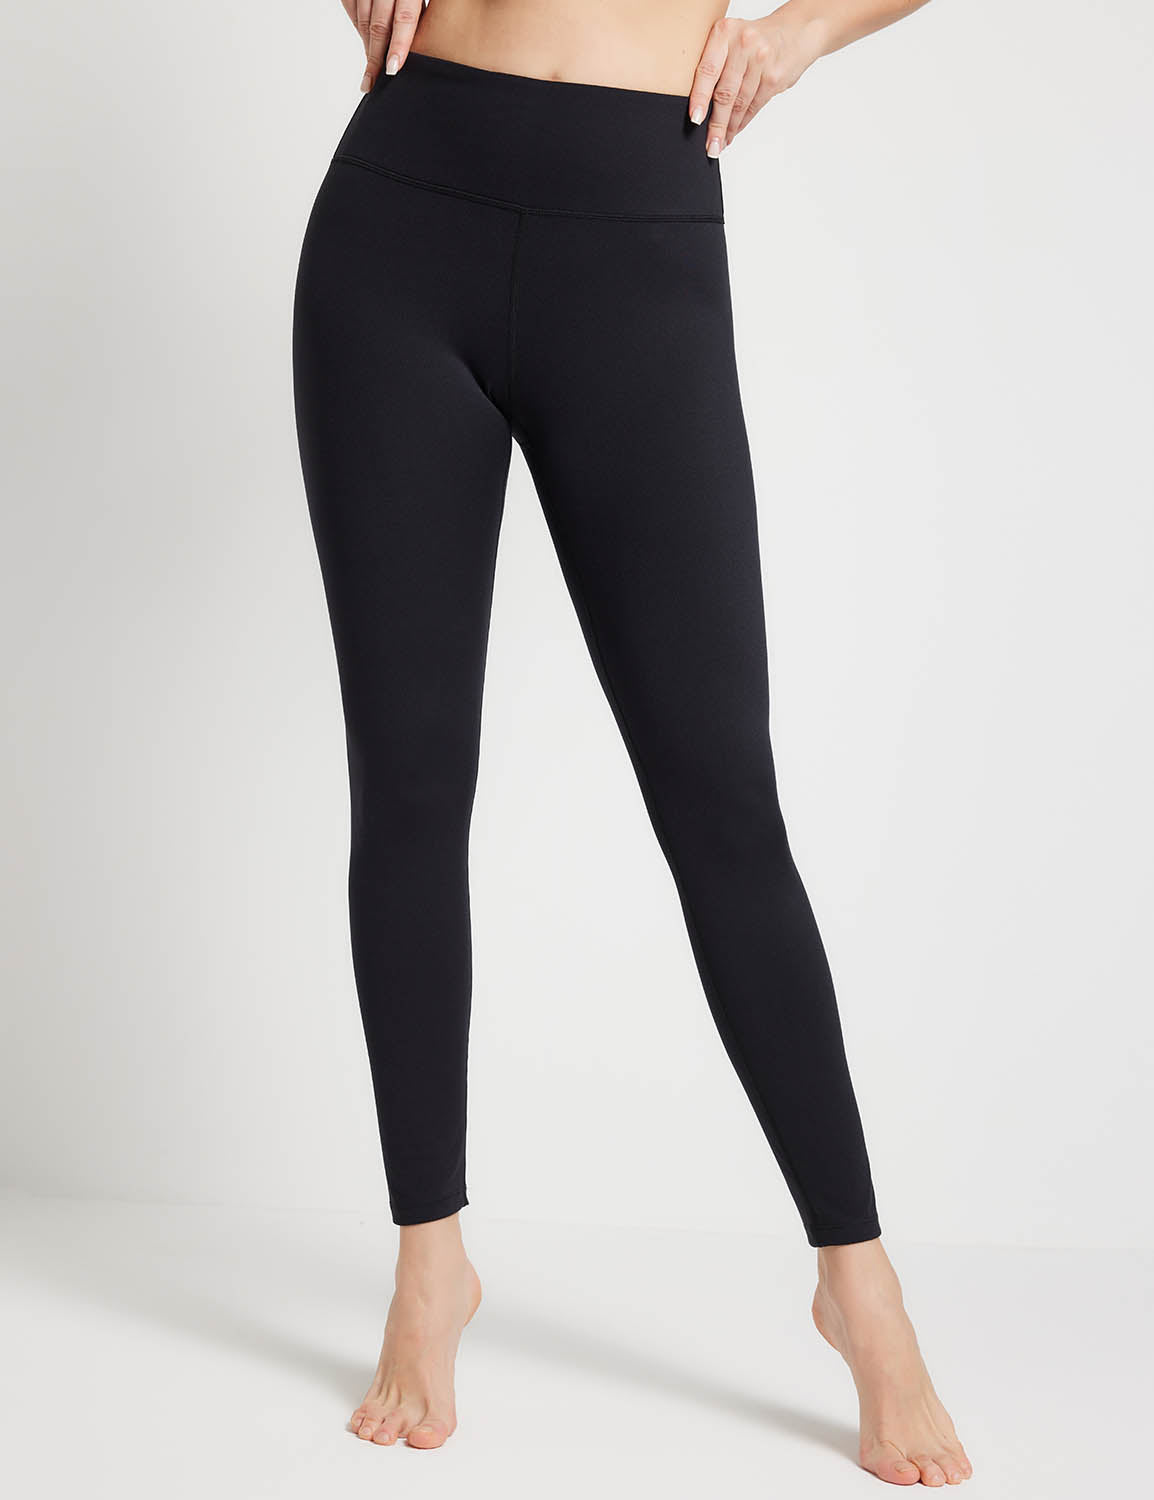 The Dos and Don'ts of Wearing Work Leggings in the Office – Baleaf-UK